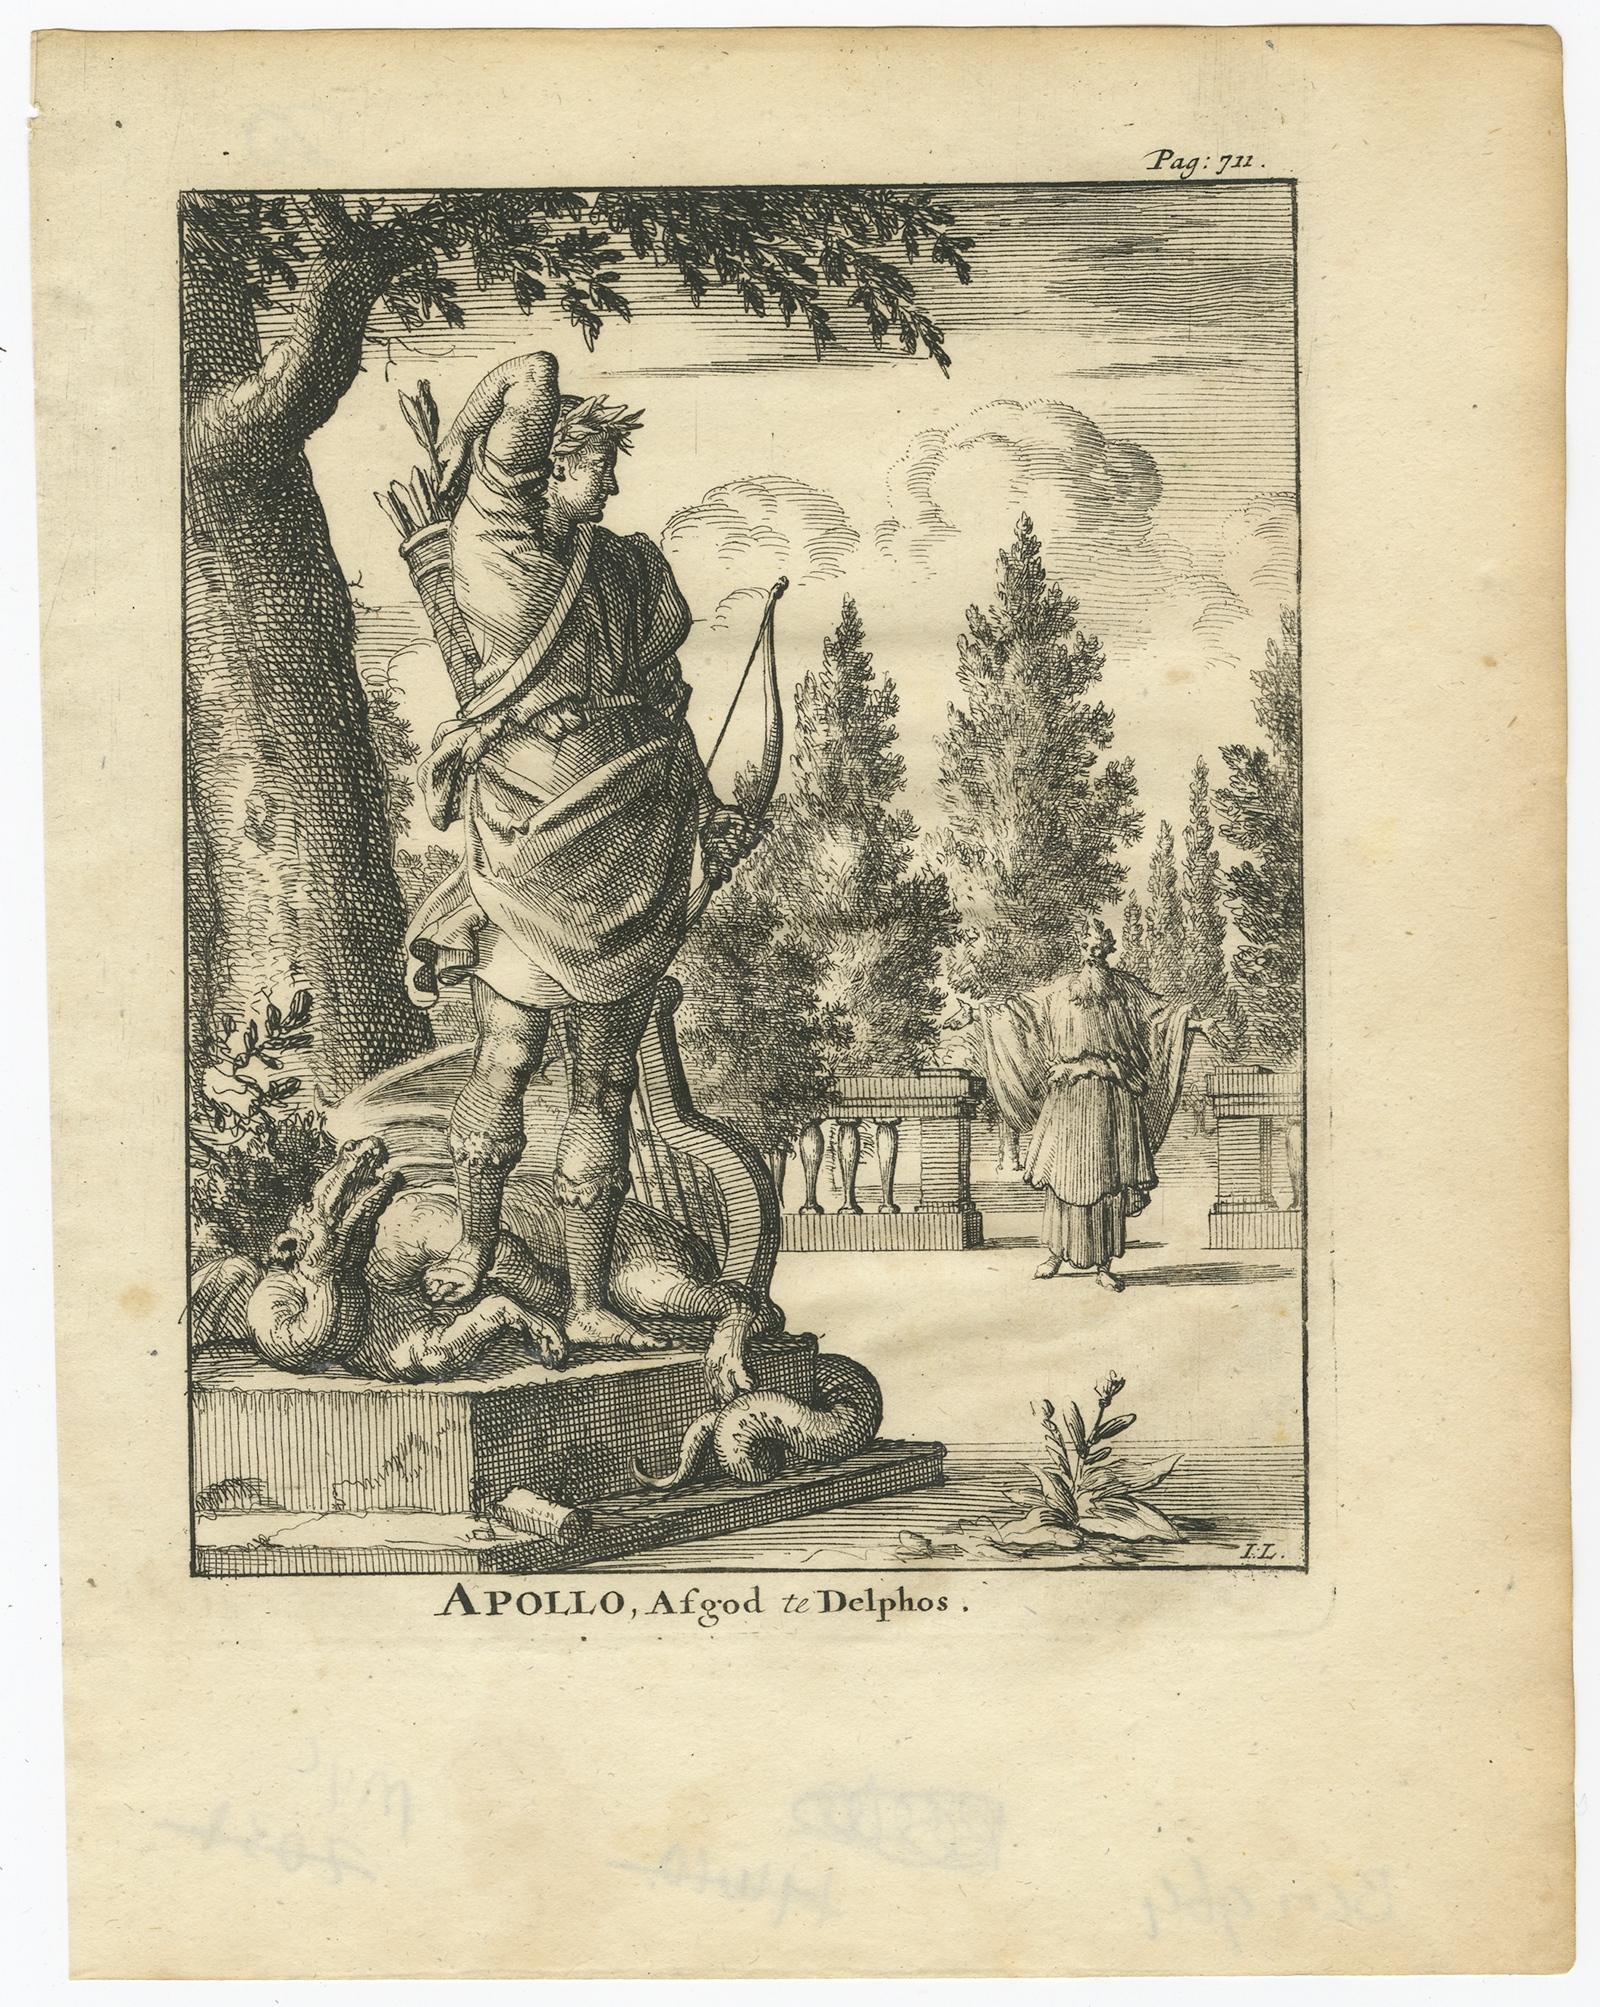 Description: Antique print, titled: 'Apollo, Afgod te Delphos' - This plate shows Apollo, the Olympian Deity and patron of Delphi.

Source unknown, to be determined.

Artists and Engravers: Made by 'Jan Luyken' after an anonymous artist. Jan Luyken